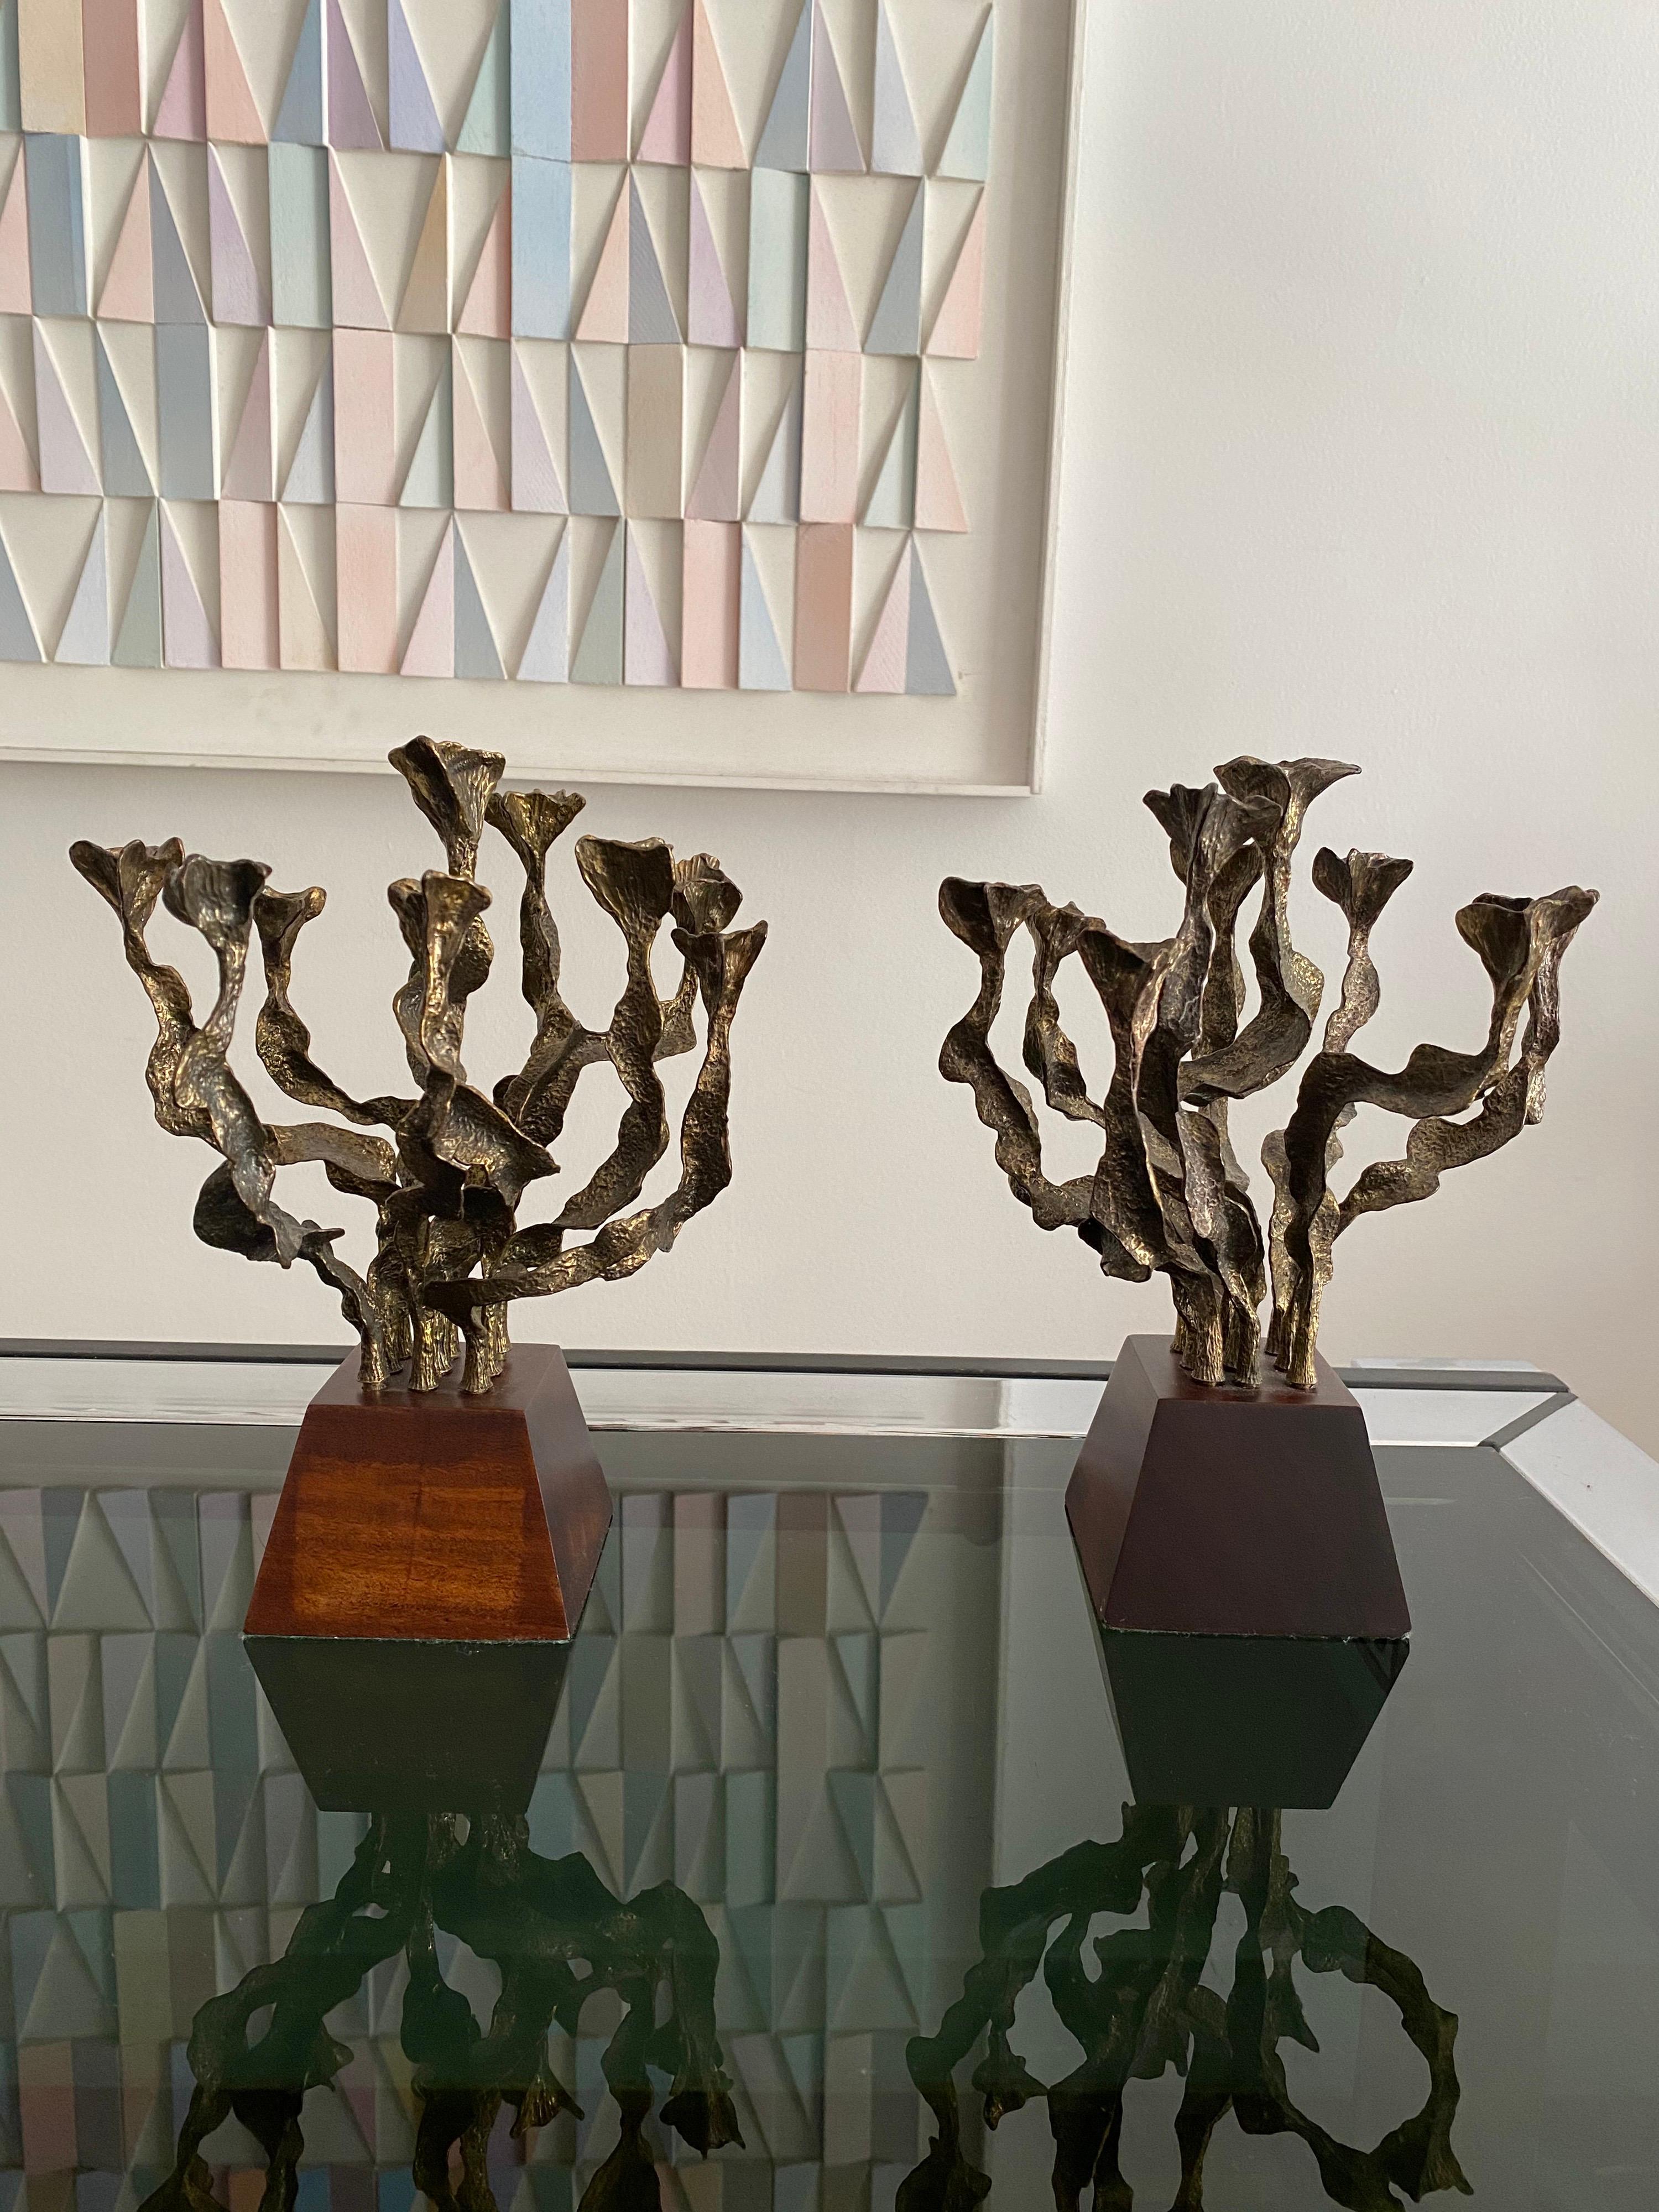 Pair of Brutalist bronze candlesticks with wooden base,
circa 1970
Good vintage condition.